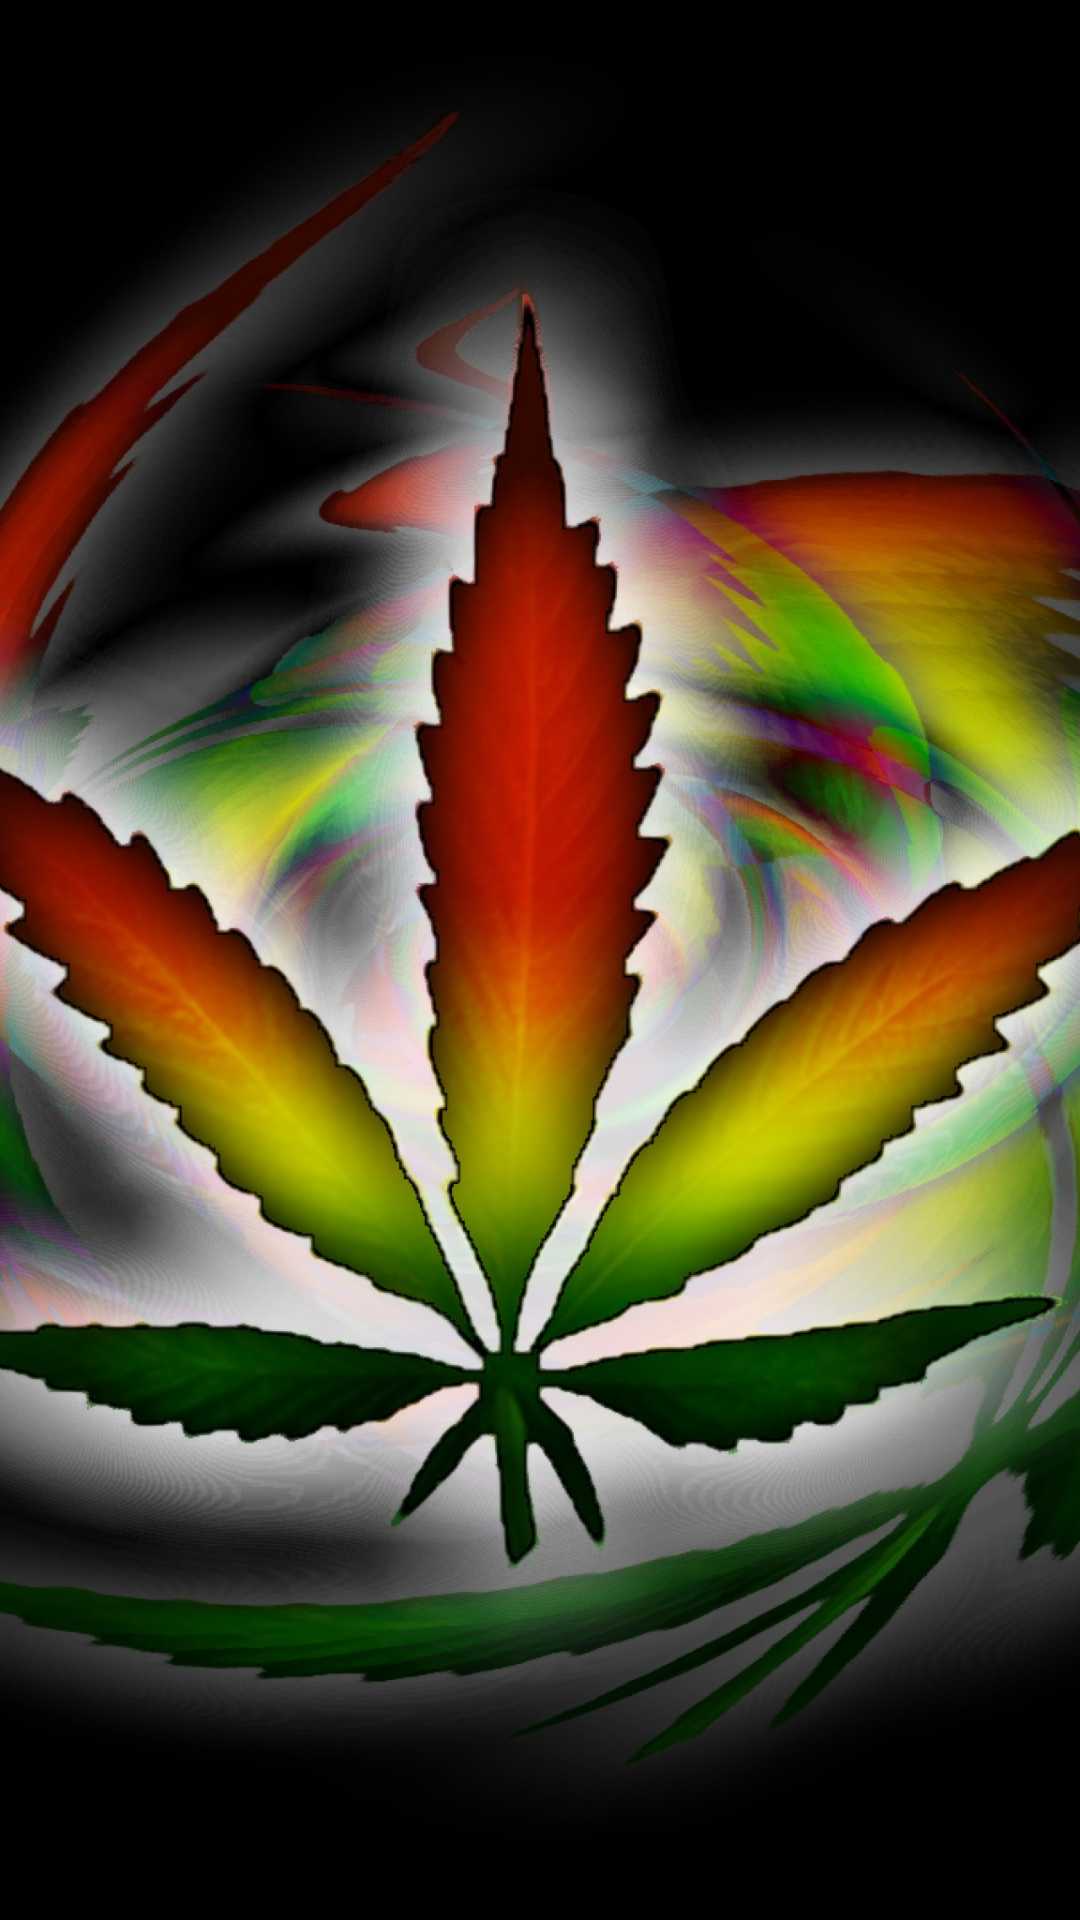 A marijuana leaf in the middle of an abstract design - Weed